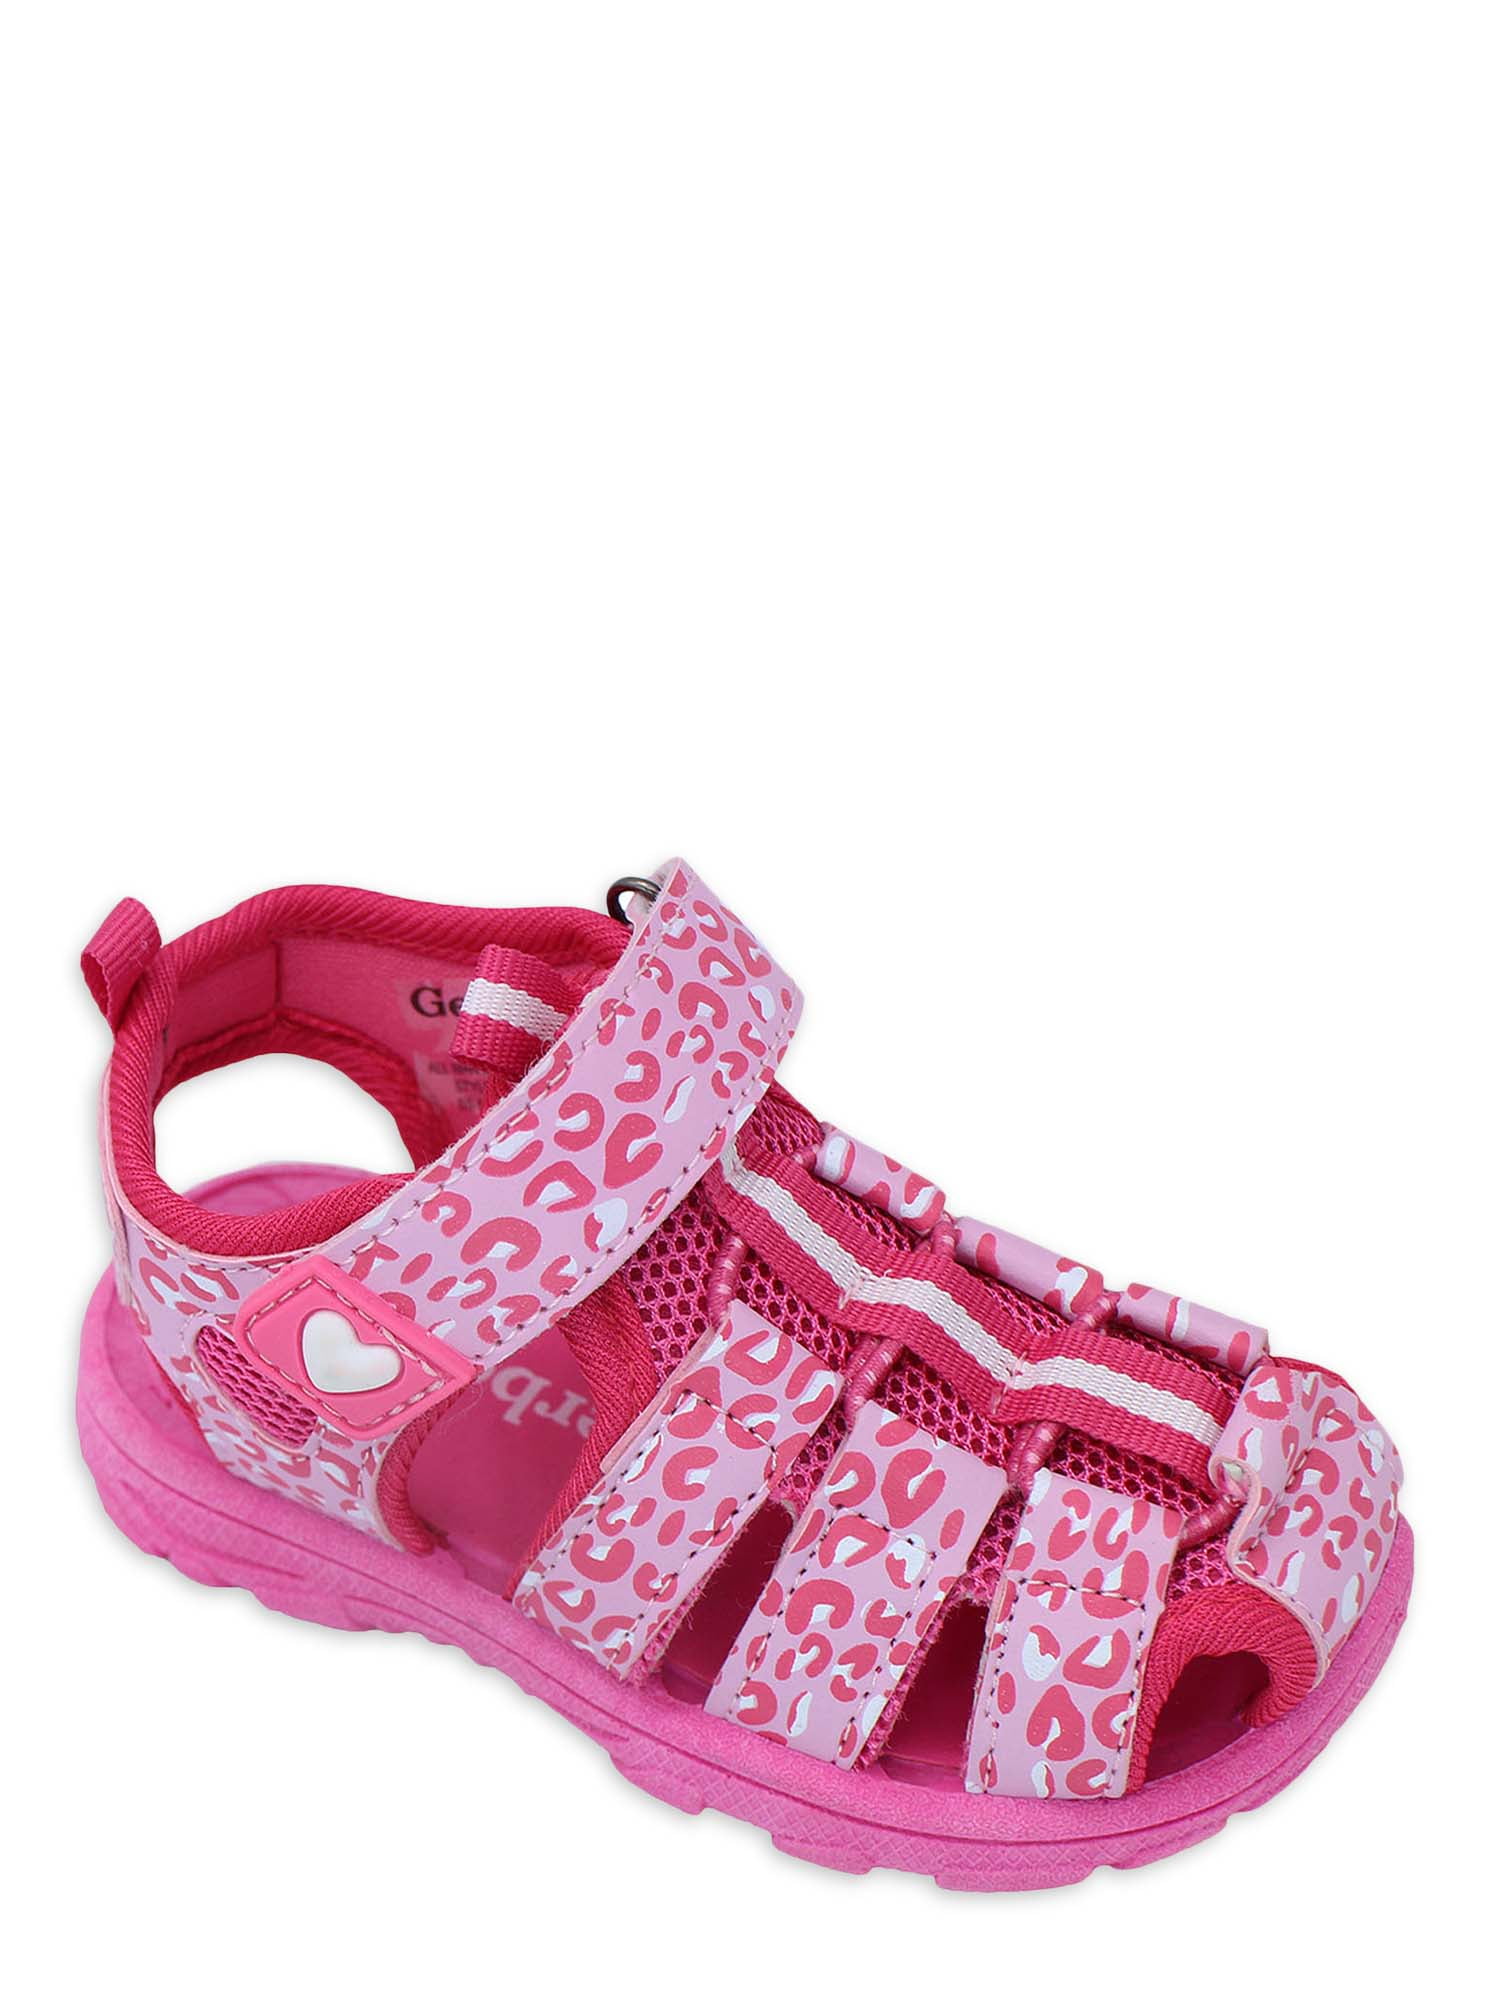 Gerber Toddler Girls Caged Closed Toe Athletic Sandals, Sizes 7-13 ...